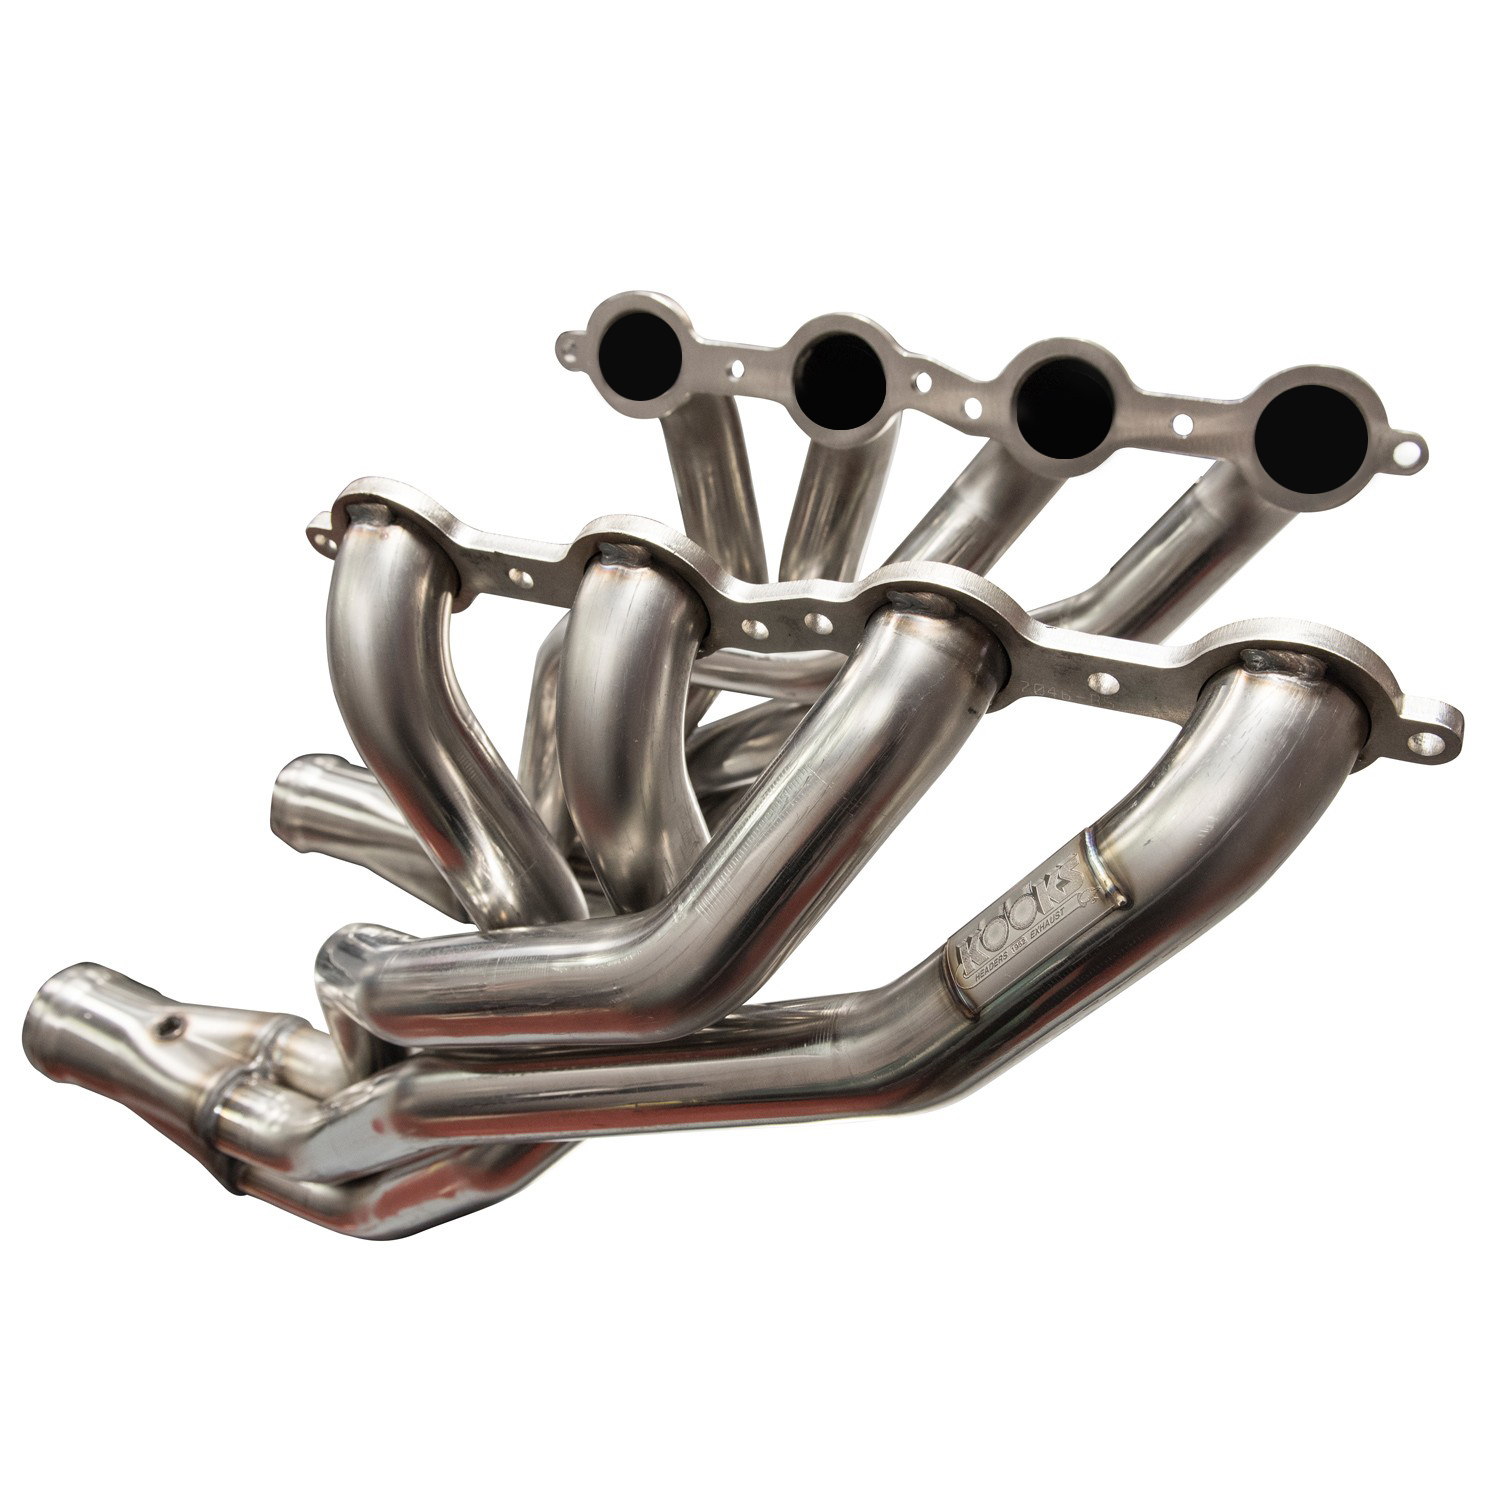 Stainless Steel Headers 2 x 3" Long Tube w/Torca Tight Connections Incl. O2 Extensions/Gaskets/Hardware